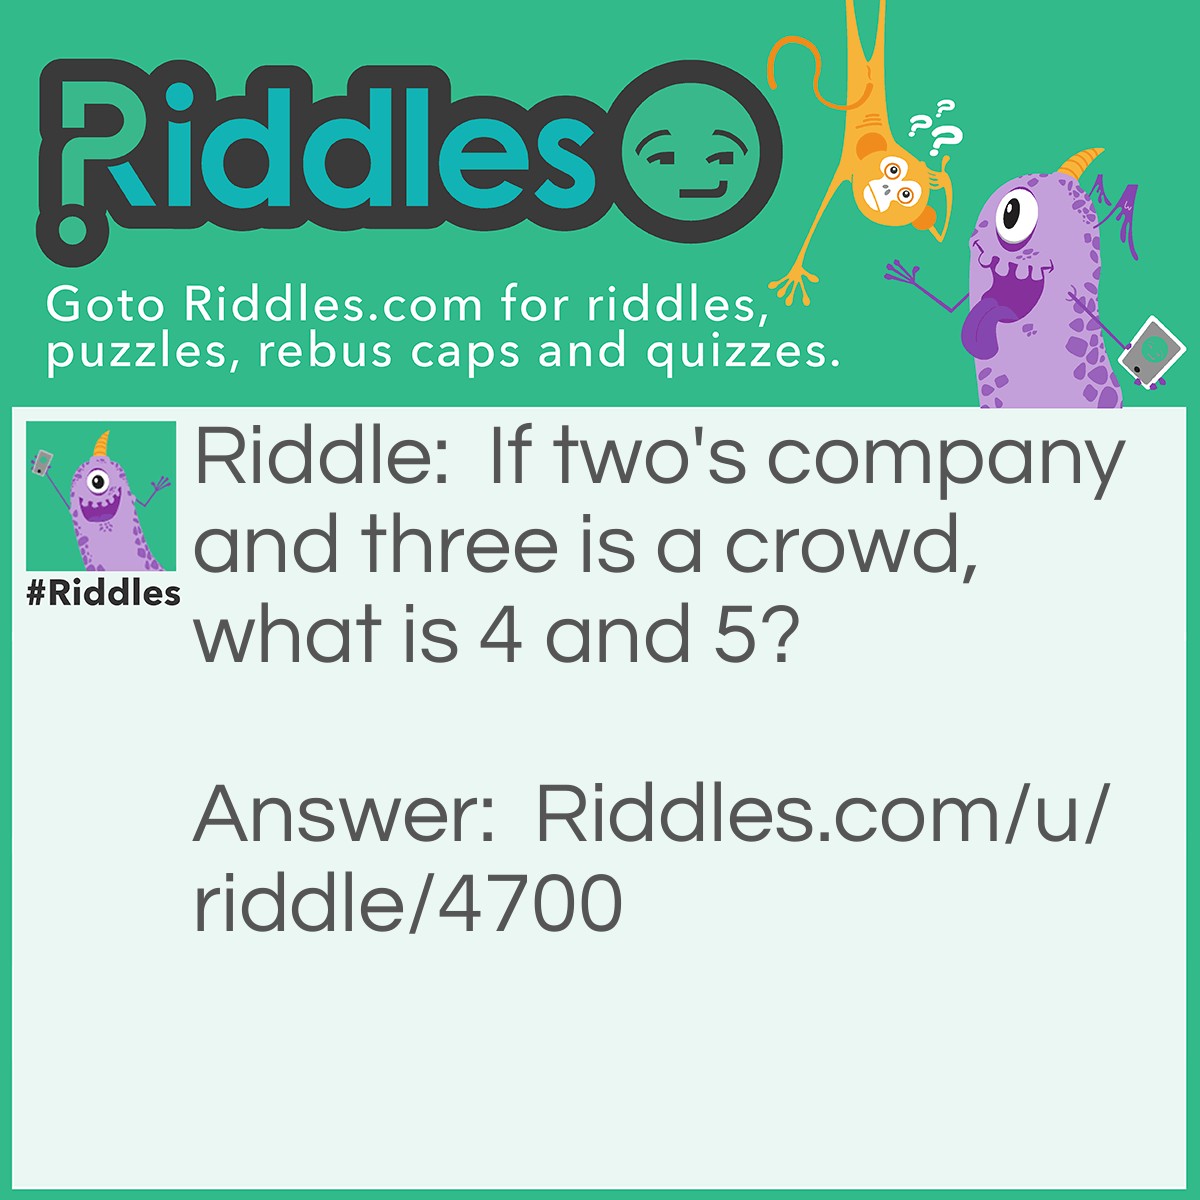 Riddle: If two's company and three is a crowd, what is 4 and 5? Answer: 9.